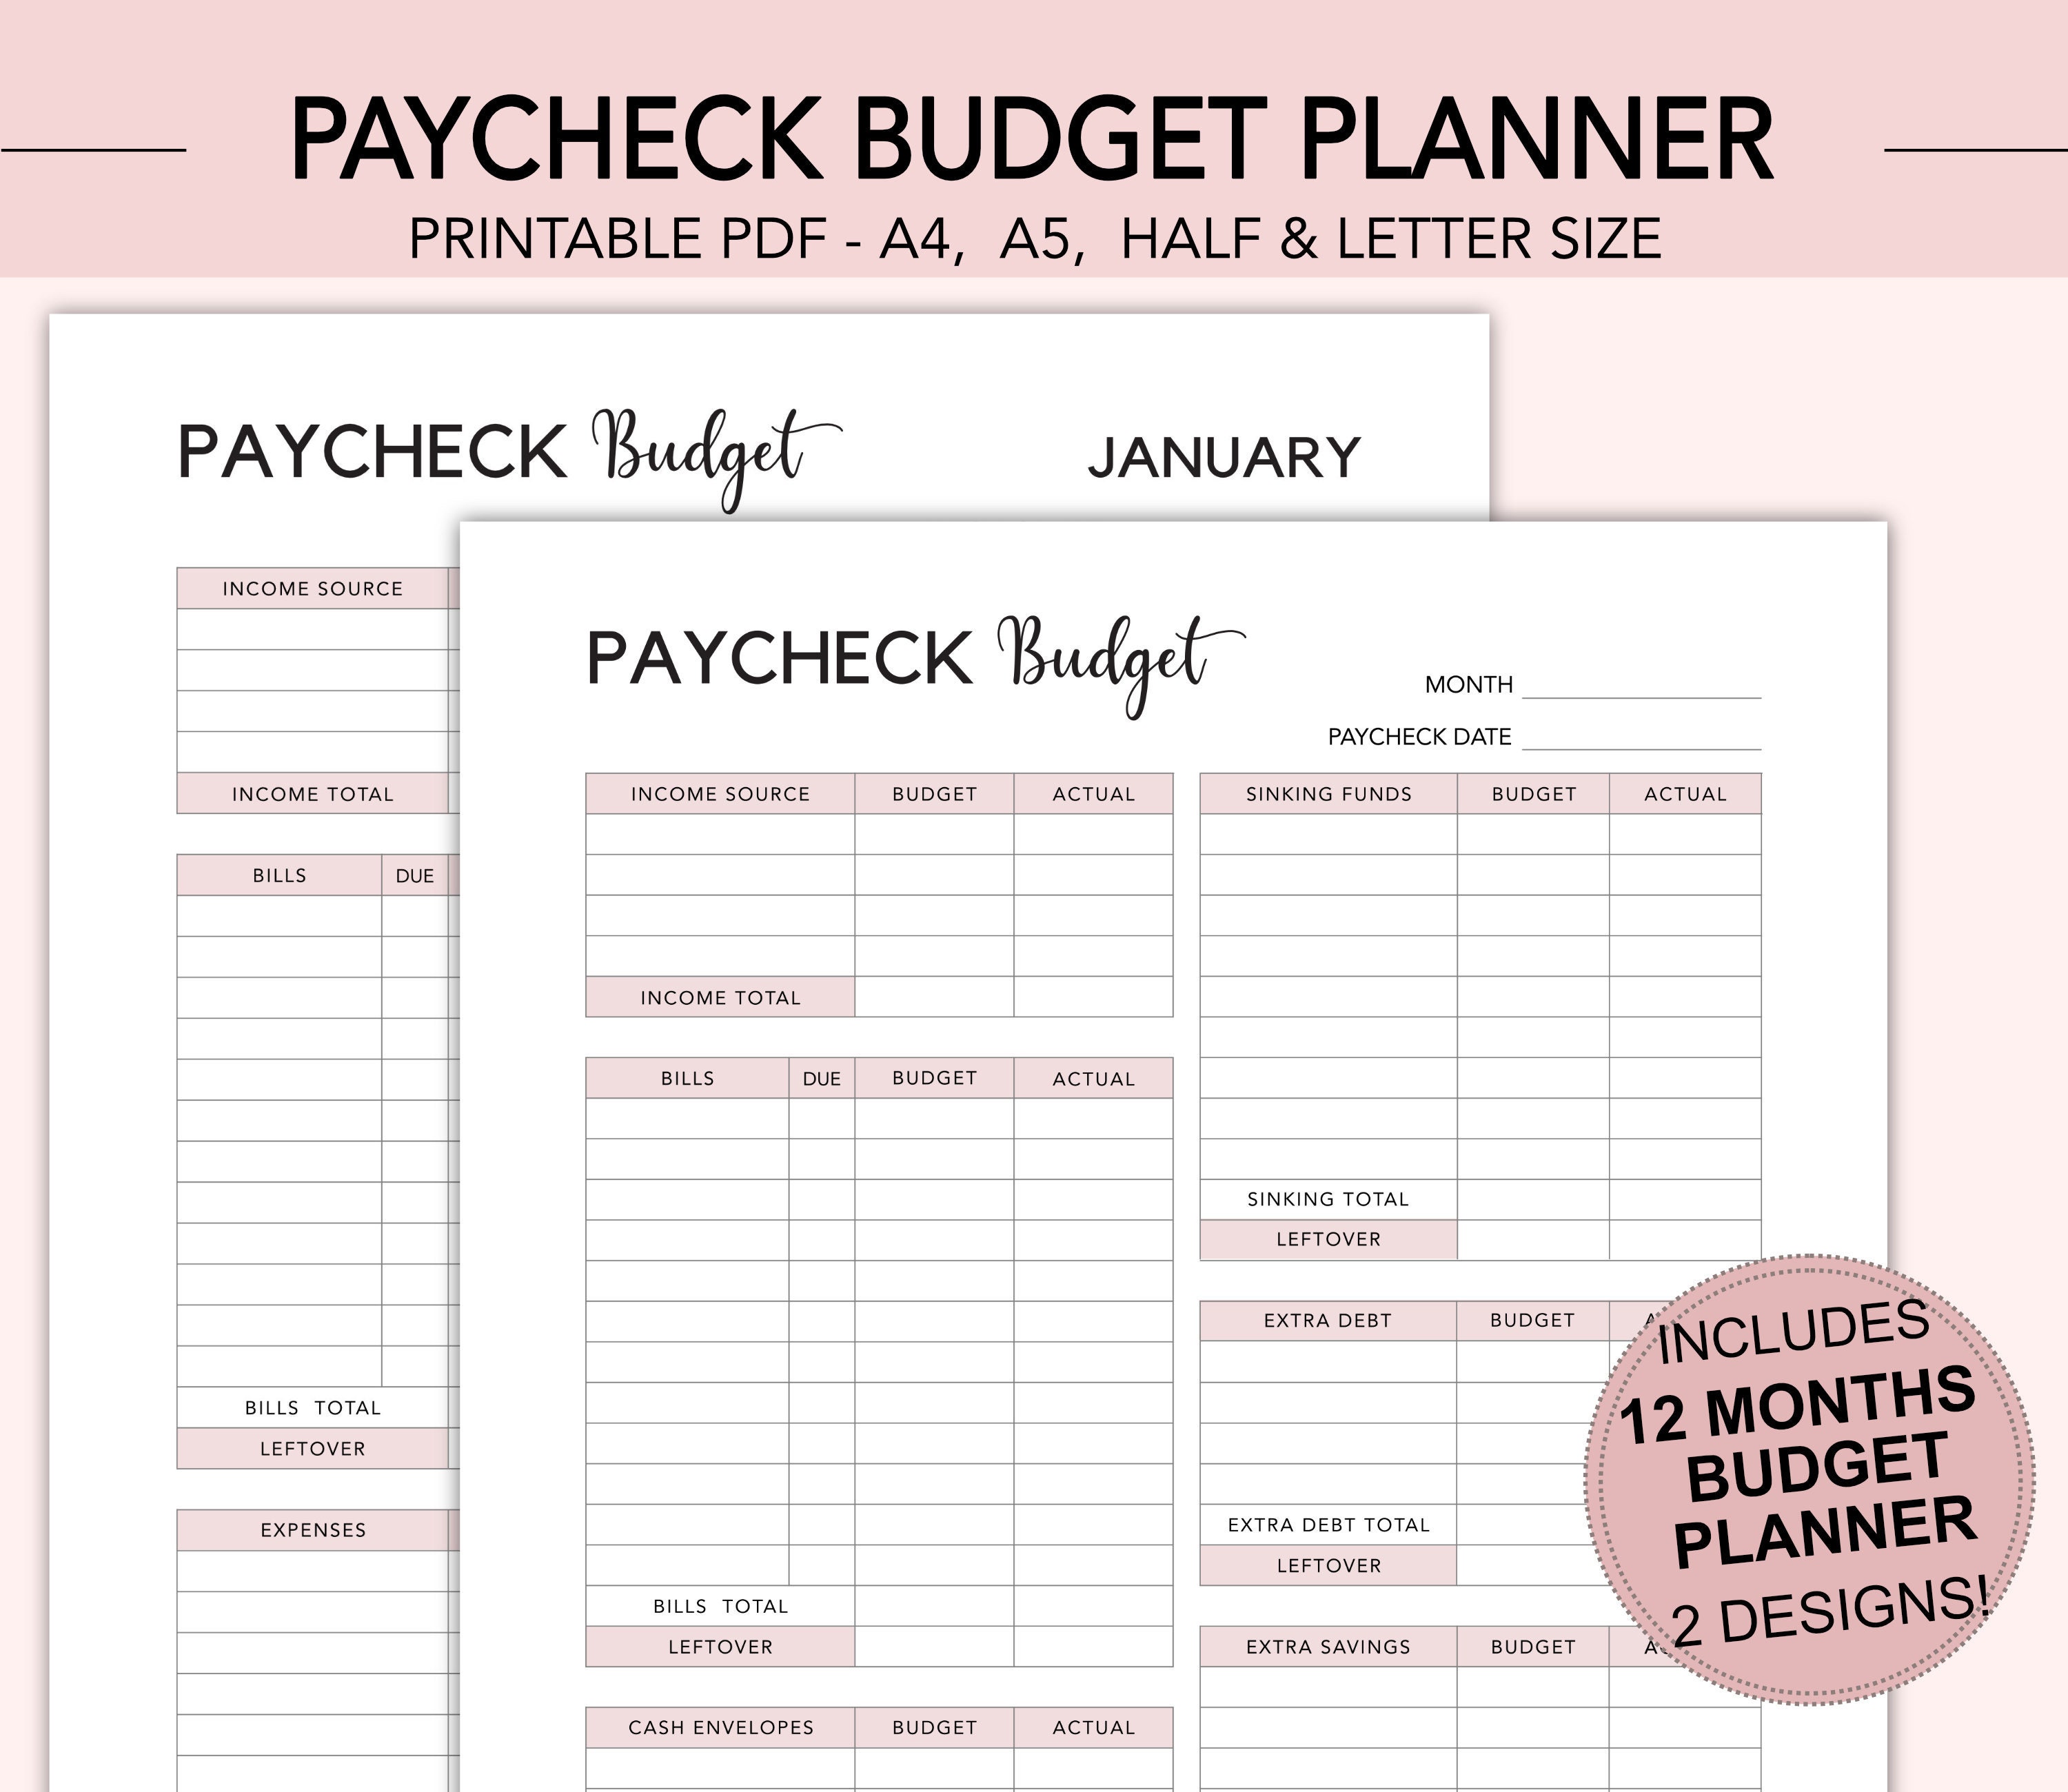 paycheck-budget-planner-printable-budget-by-paycheck-worksheet-biweekly-personal-budget-template